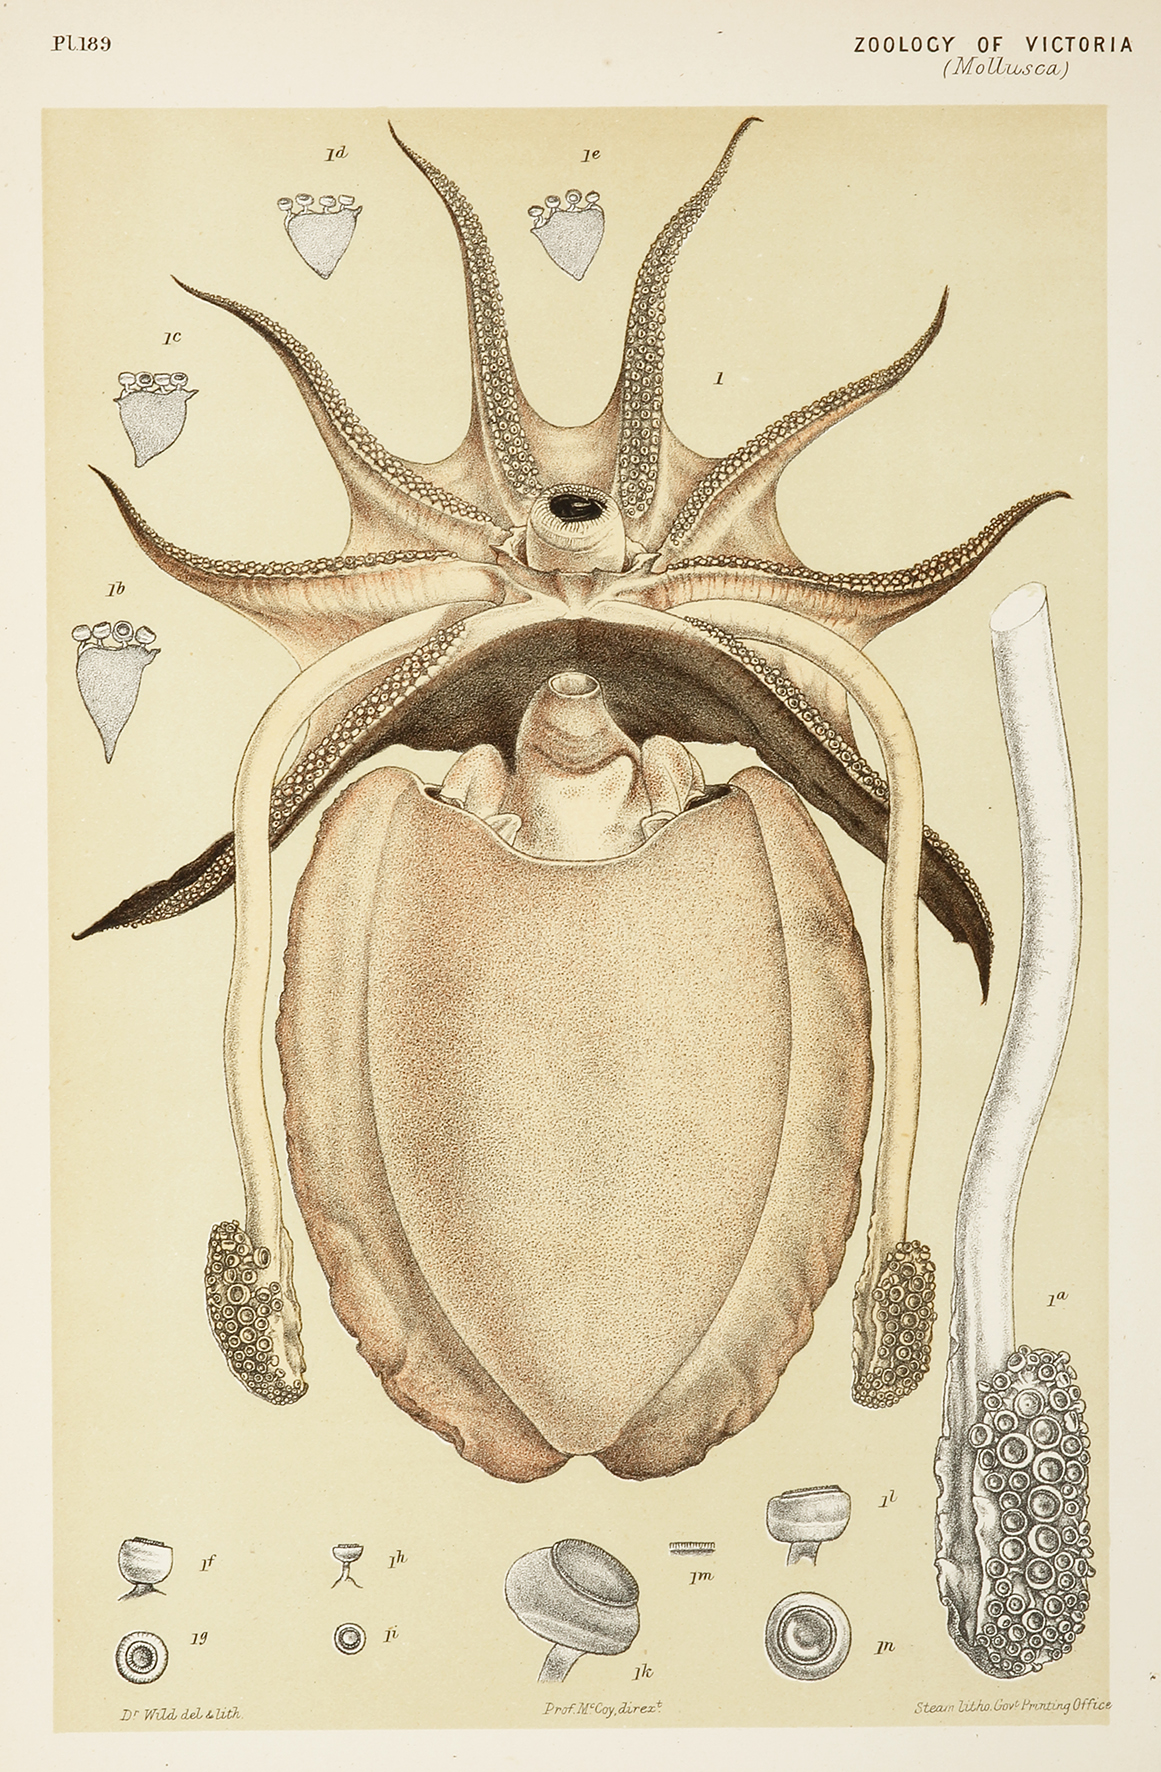 The Large Melbourne Sepia or Cuttle-fish [Giant Cuttlefish], Sepia apama - Antique Print from 1889